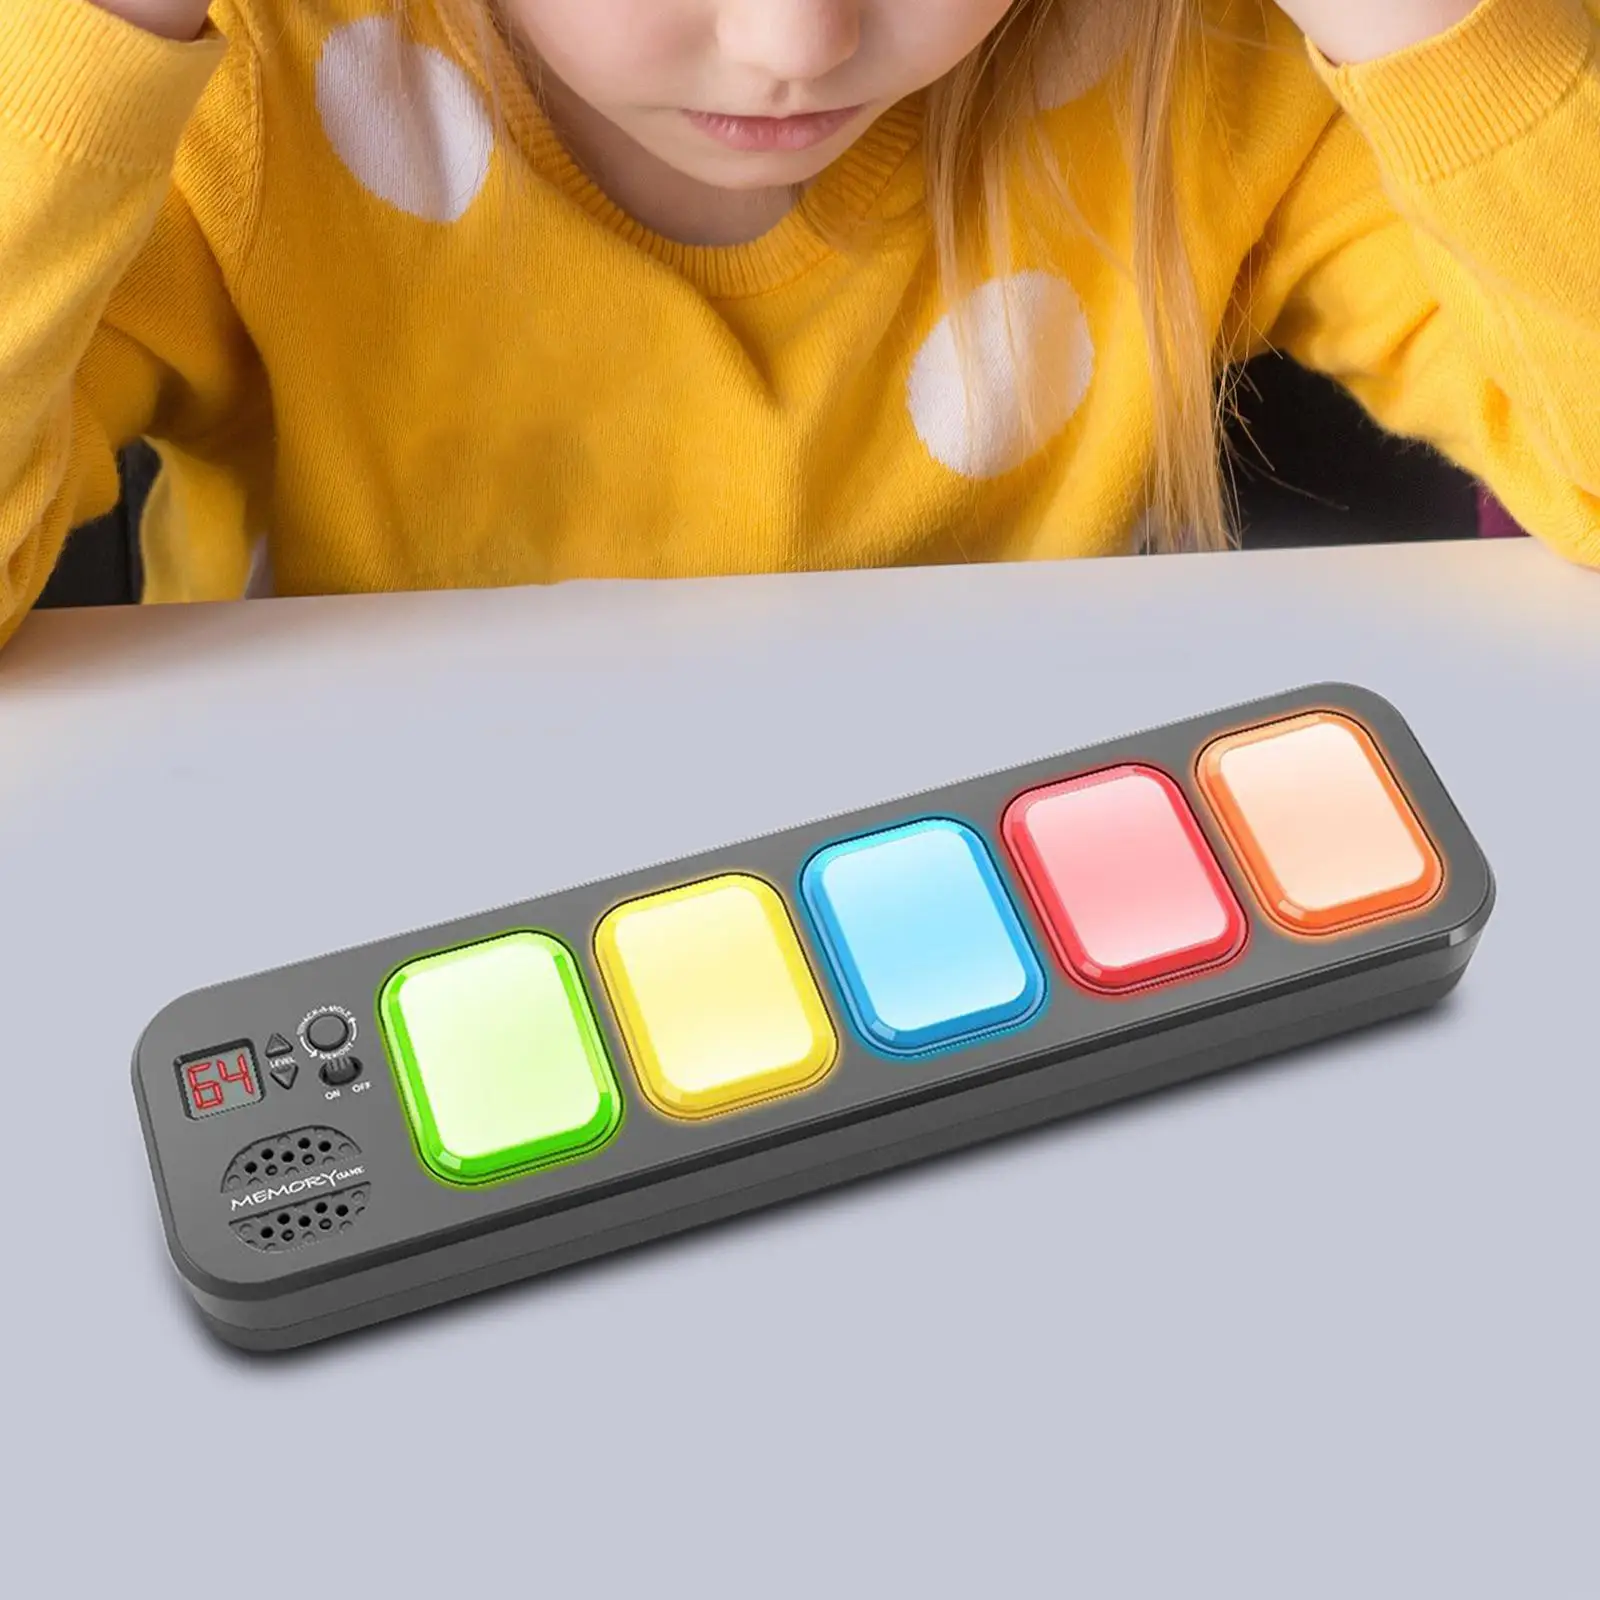 Pocket Electronic Memory Game Training Hand Brain Coordination Interactive Toy Educational Memory Maze Game Kids Ages 6+